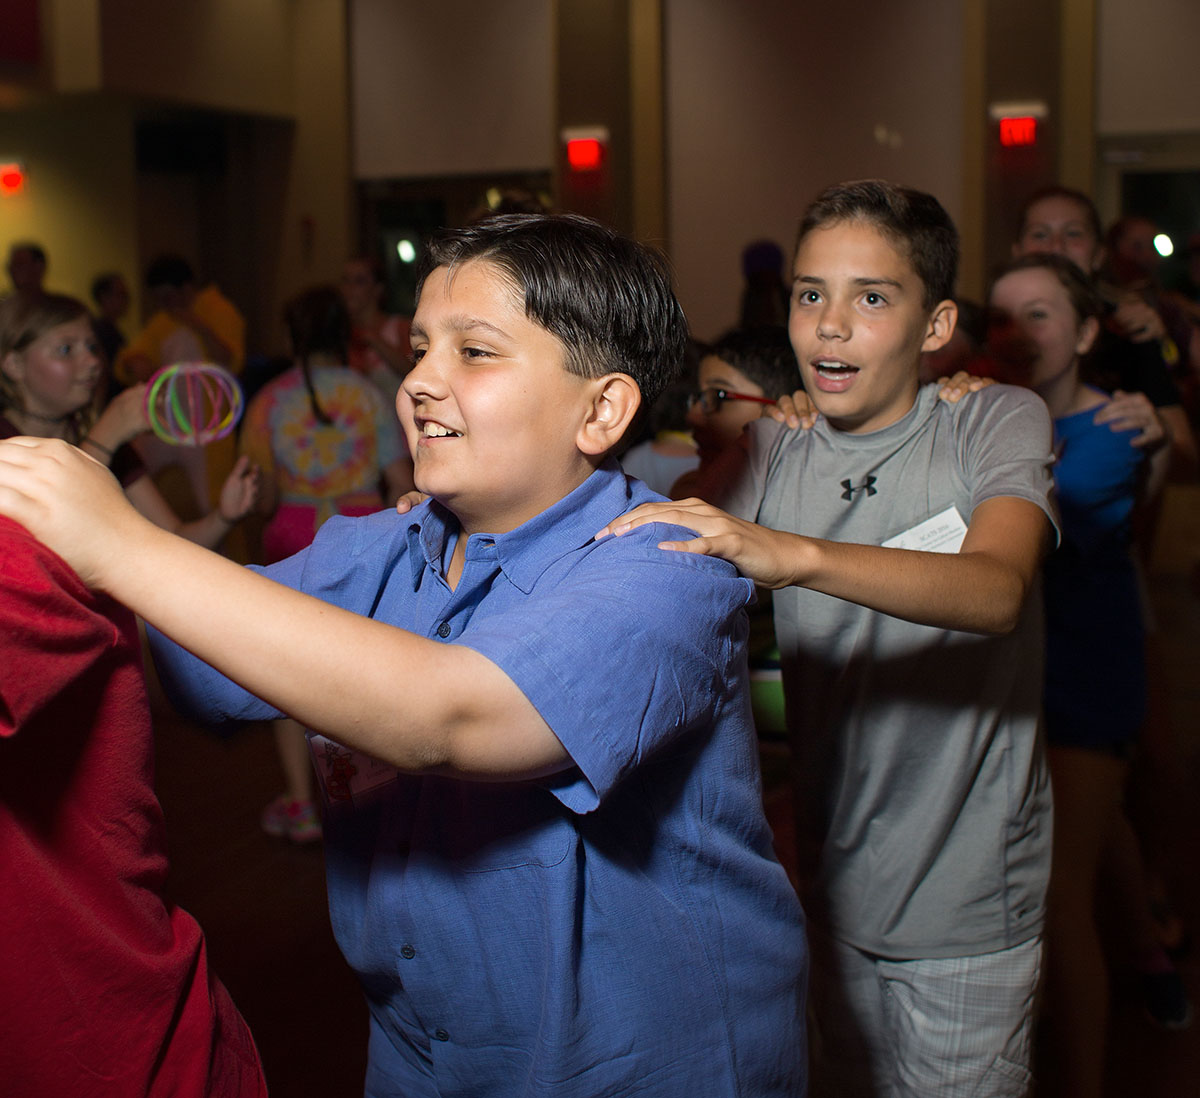 Ari Srivastava from Bowling Green dances in a conga line during the SCATS Dance Thursday, June 23. (Photo by Tucker Allen Covey)